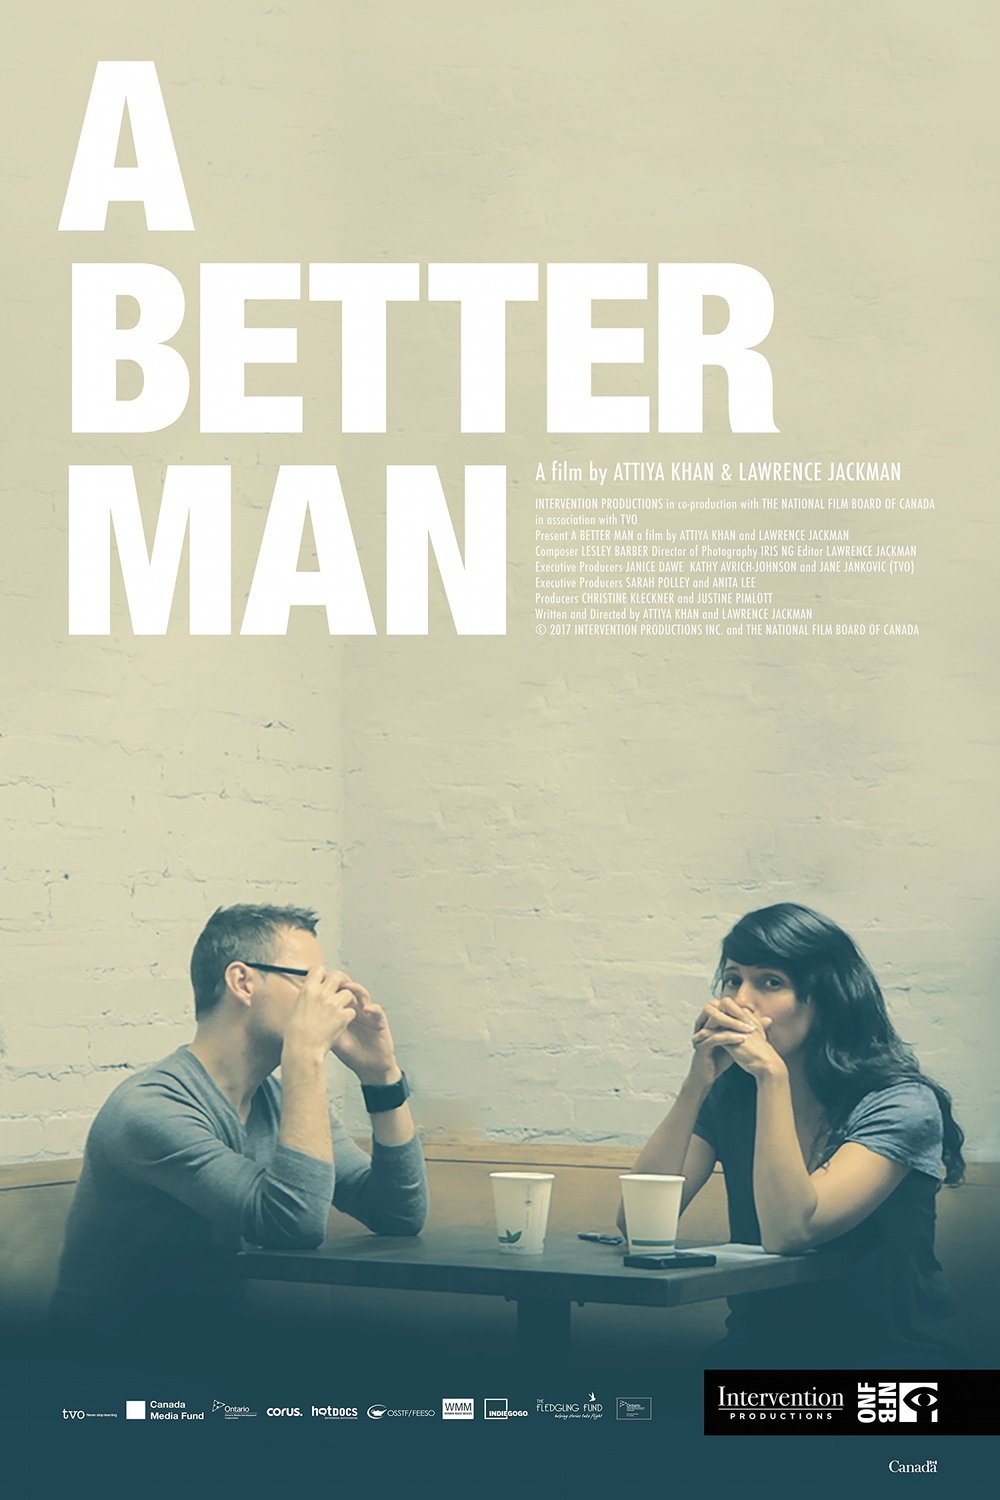 Poster of the movie A Better Man